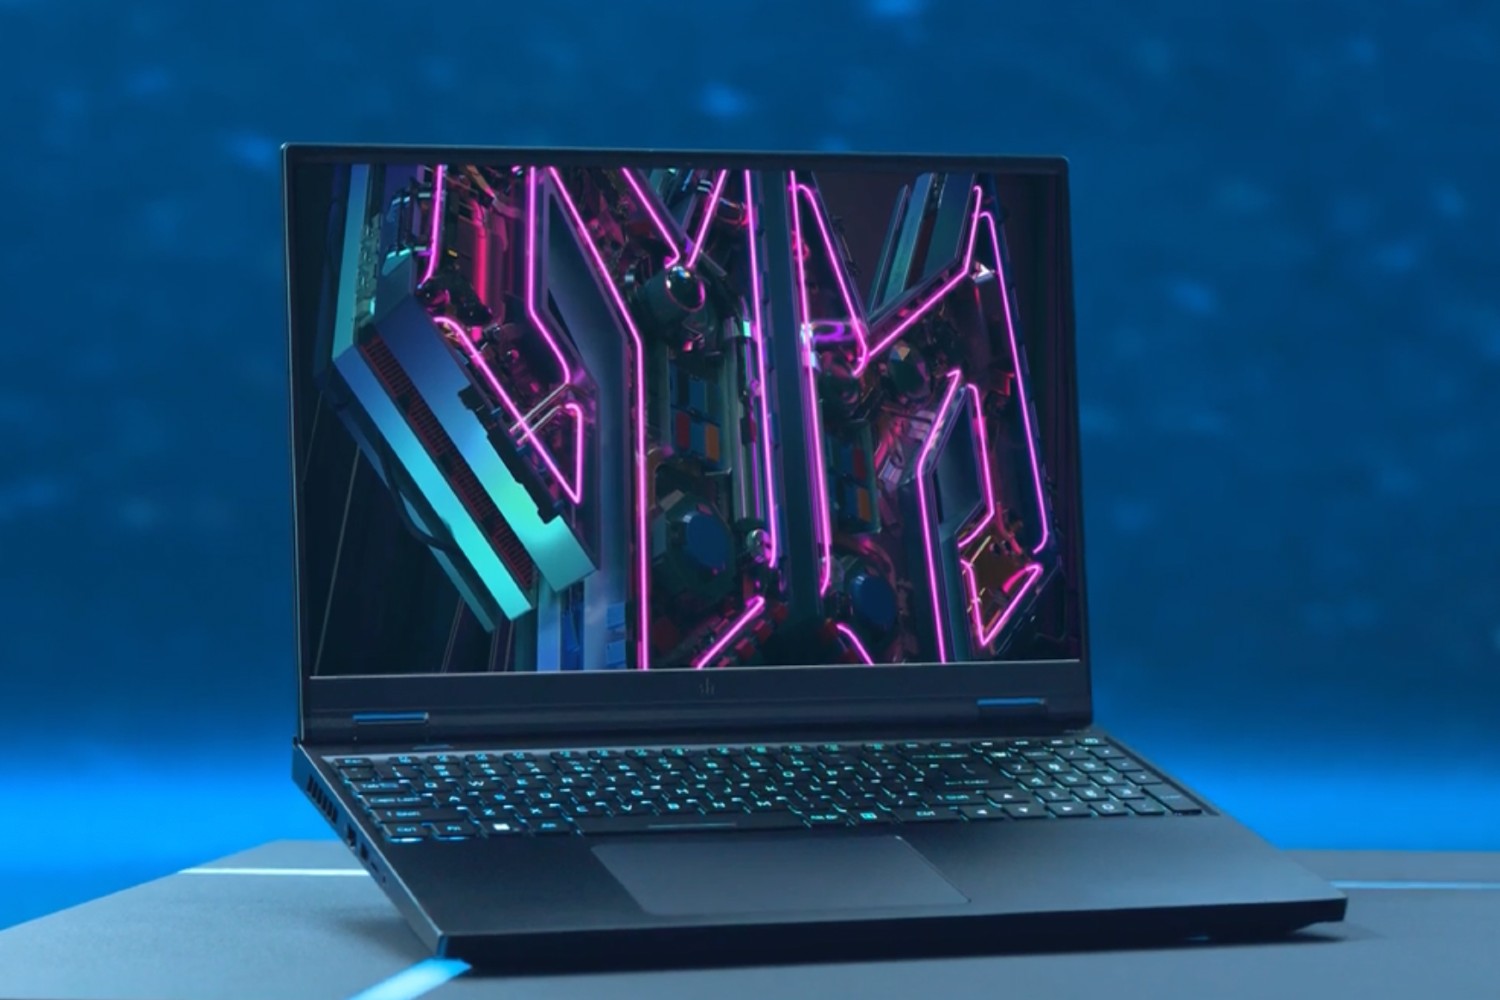 Introducing the world's first laptops built for cloud gaming